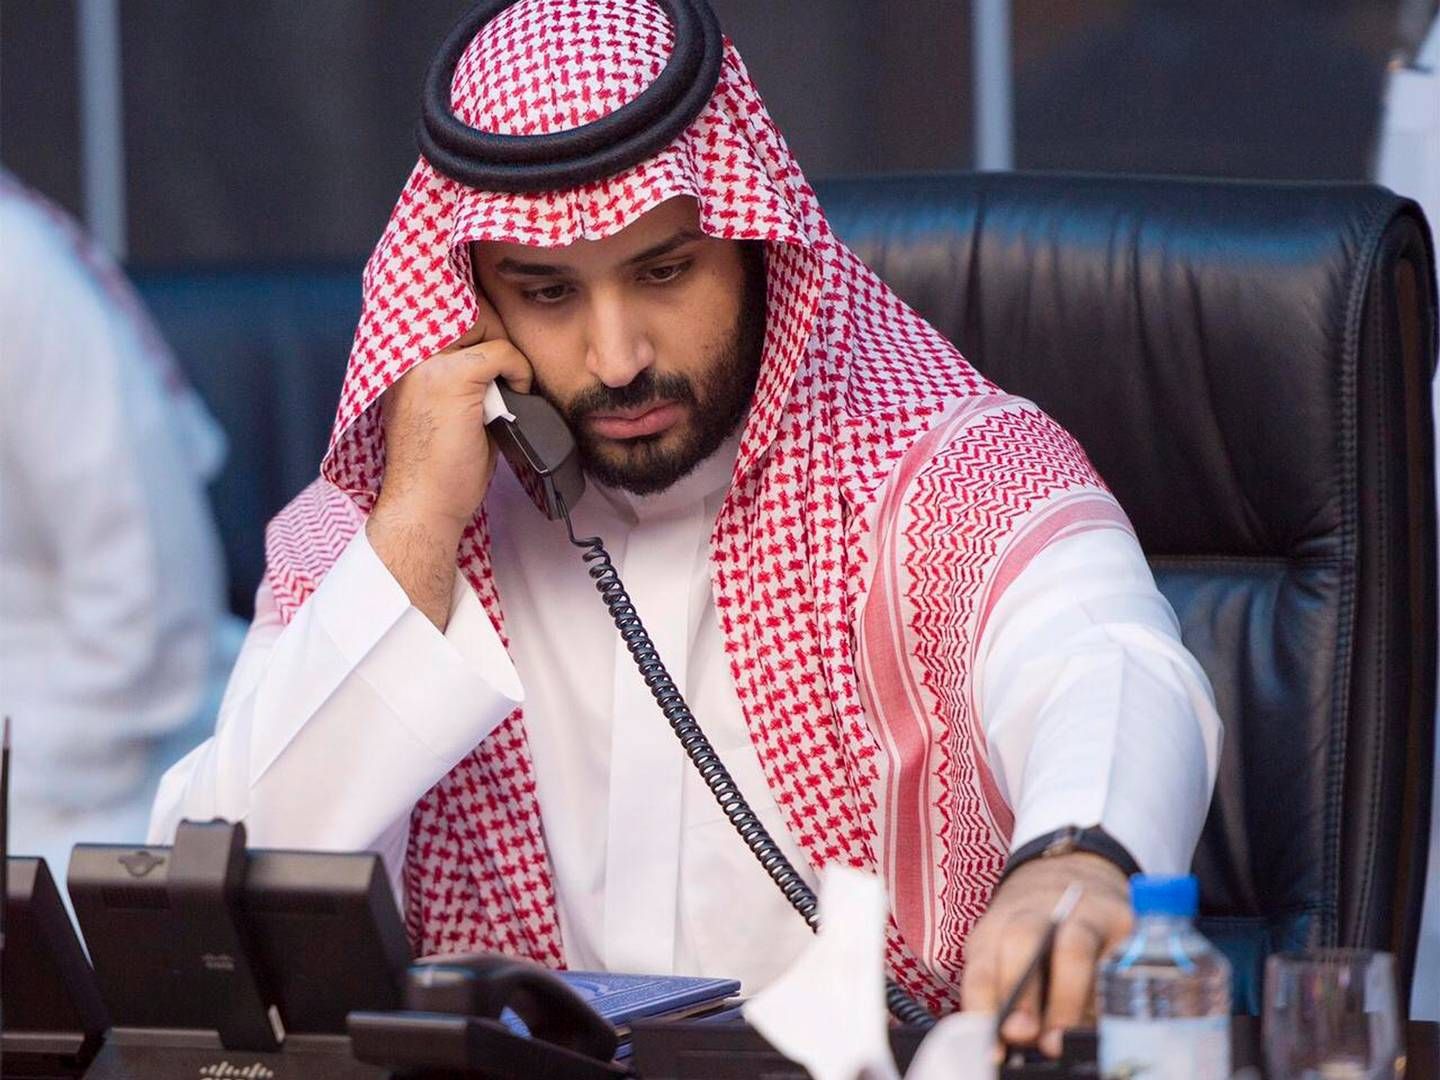 Crown Prince Mohammad Bin Salman appears to be scaling back his ambitions for the desert project Neom, which has run into funding problems. | Foto: Handout/Reuters/Ritzau Scanpix